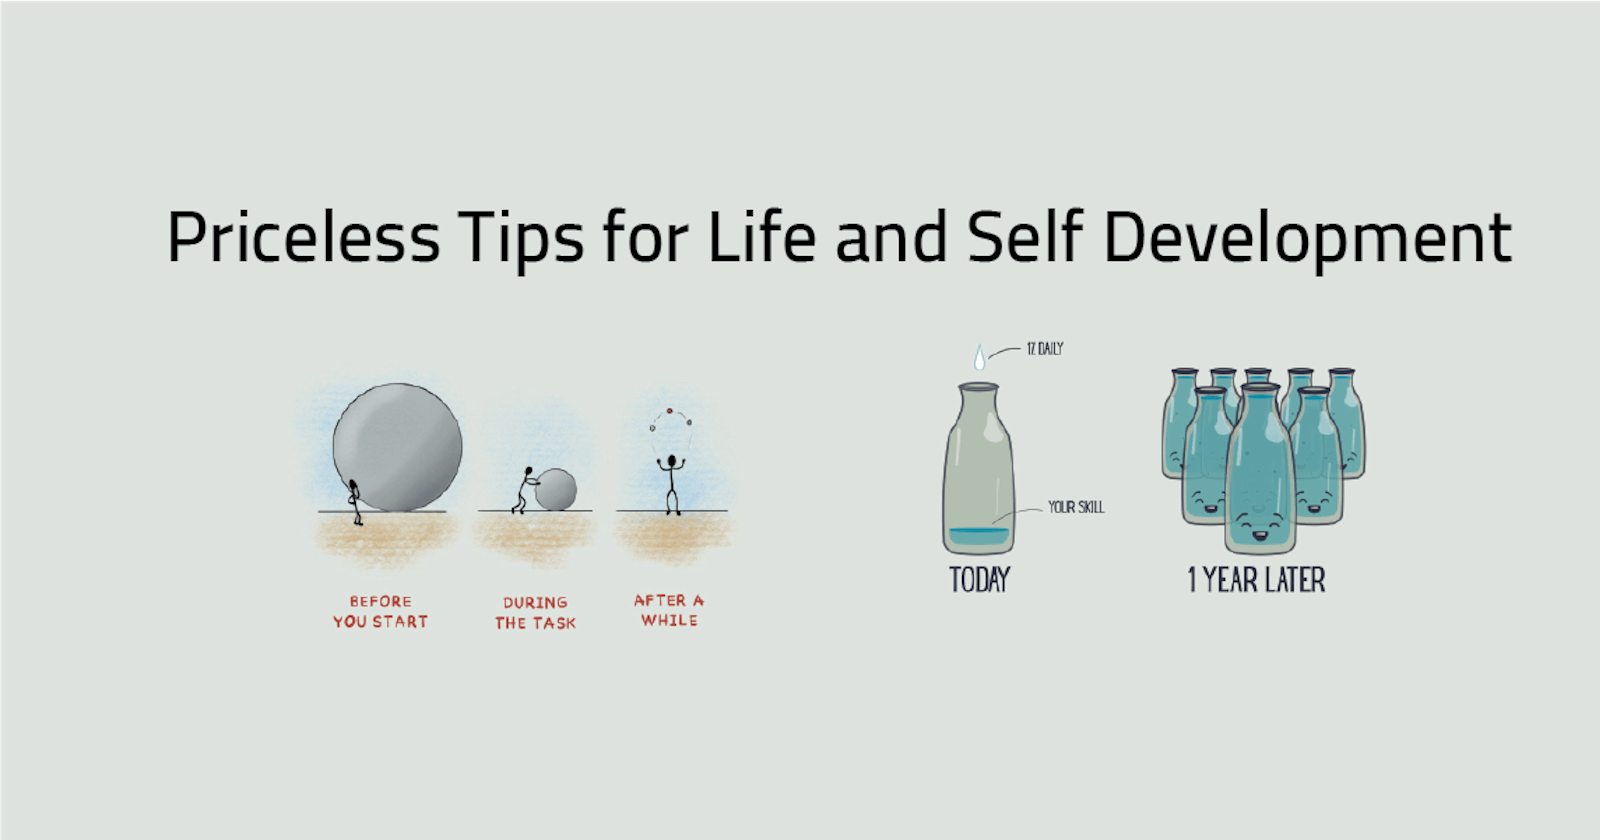 Priceless Tips for Life and Self Development